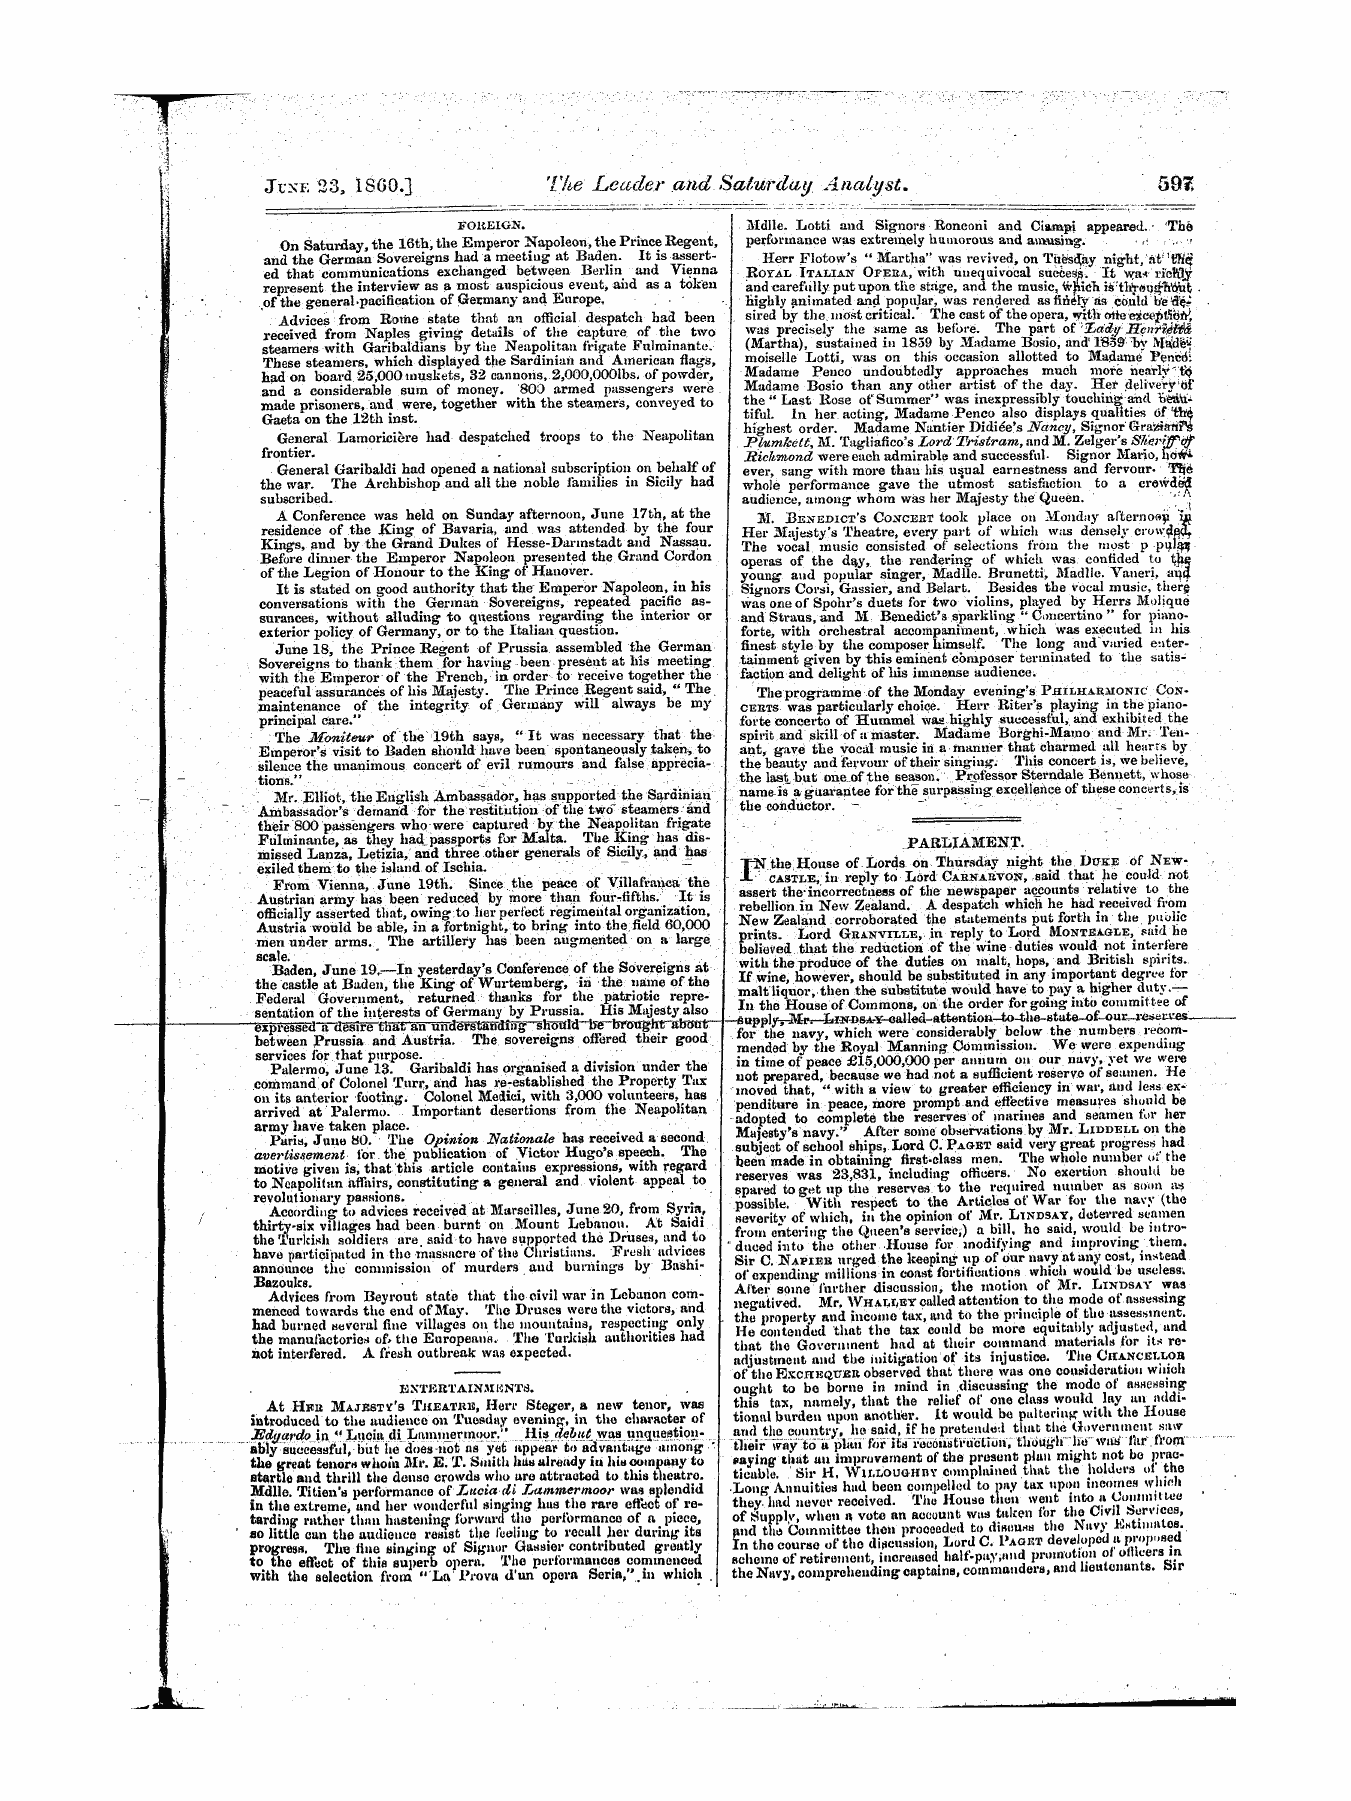 Leader (1850-1860): jS F Y, 1st edition - Parliament.